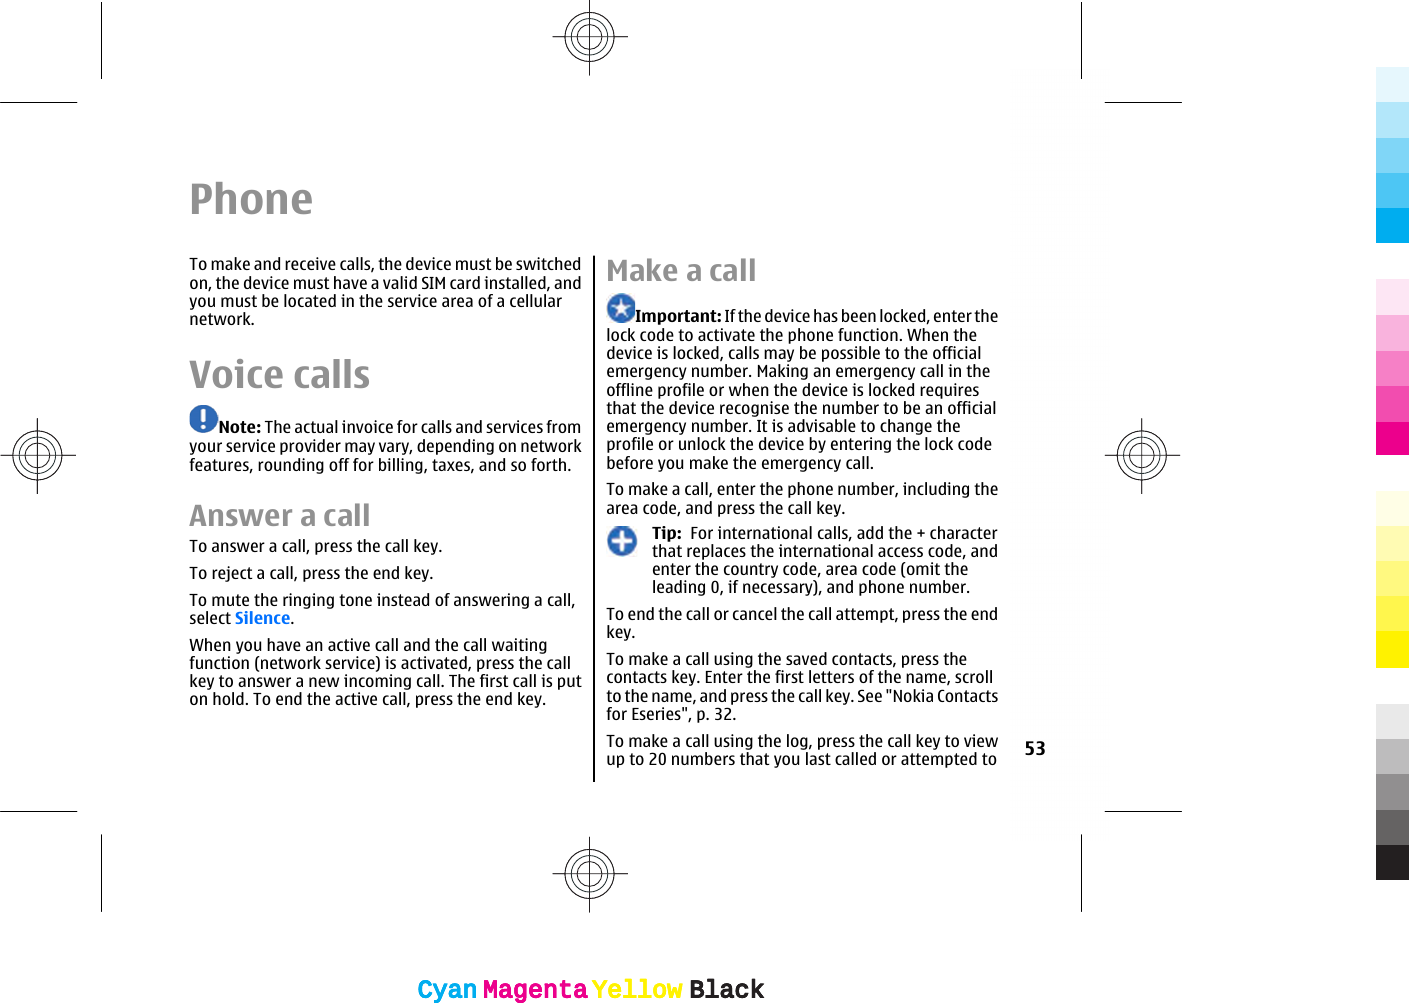 PhoneTo make and receive calls, the device must be switchedon, the device must have a valid SIM card installed, andyou must be located in the service area of a cellularnetwork.Voice callsNote: The actual invoice for calls and services fromyour service provider may vary, depending on networkfeatures, rounding off for billing, taxes, and so forth.Answer a callTo answer a call, press the call key.To reject a call, press the end key.To mute the ringing tone instead of answering a call,select Silence.When you have an active call and the call waitingfunction (network service) is activated, press the callkey to answer a new incoming call. The first call is puton hold. To end the active call, press the end key.Make a callImportant: If the device has been locked, enter thelock code to activate the phone function. When thedevice is locked, calls may be possible to the officialemergency number. Making an emergency call in theoffline profile or when the device is locked requiresthat the device recognise the number to be an officialemergency number. It is advisable to change theprofile or unlock the device by entering the lock codebefore you make the emergency call.To make a call, enter the phone number, including thearea code, and press the call key.Tip:  For international calls, add the + characterthat replaces the international access code, andenter the country code, area code (omit theleading 0, if necessary), and phone number.To end the call or cancel the call attempt, press the endkey.To make a call using the saved contacts, press thecontacts key. Enter the first letters of the name, scrollto the name, and press the call key. See &quot;Nokia Contactsfor Eseries&quot;, p. 32.To make a call using the log, press the call key to viewup to 20 numbers that you last called or attempted to 53CyanCyanMagentaMagentaYellowYellowBlackBlackCyanCyanMagentaMagentaYellowYellowBlackBlack